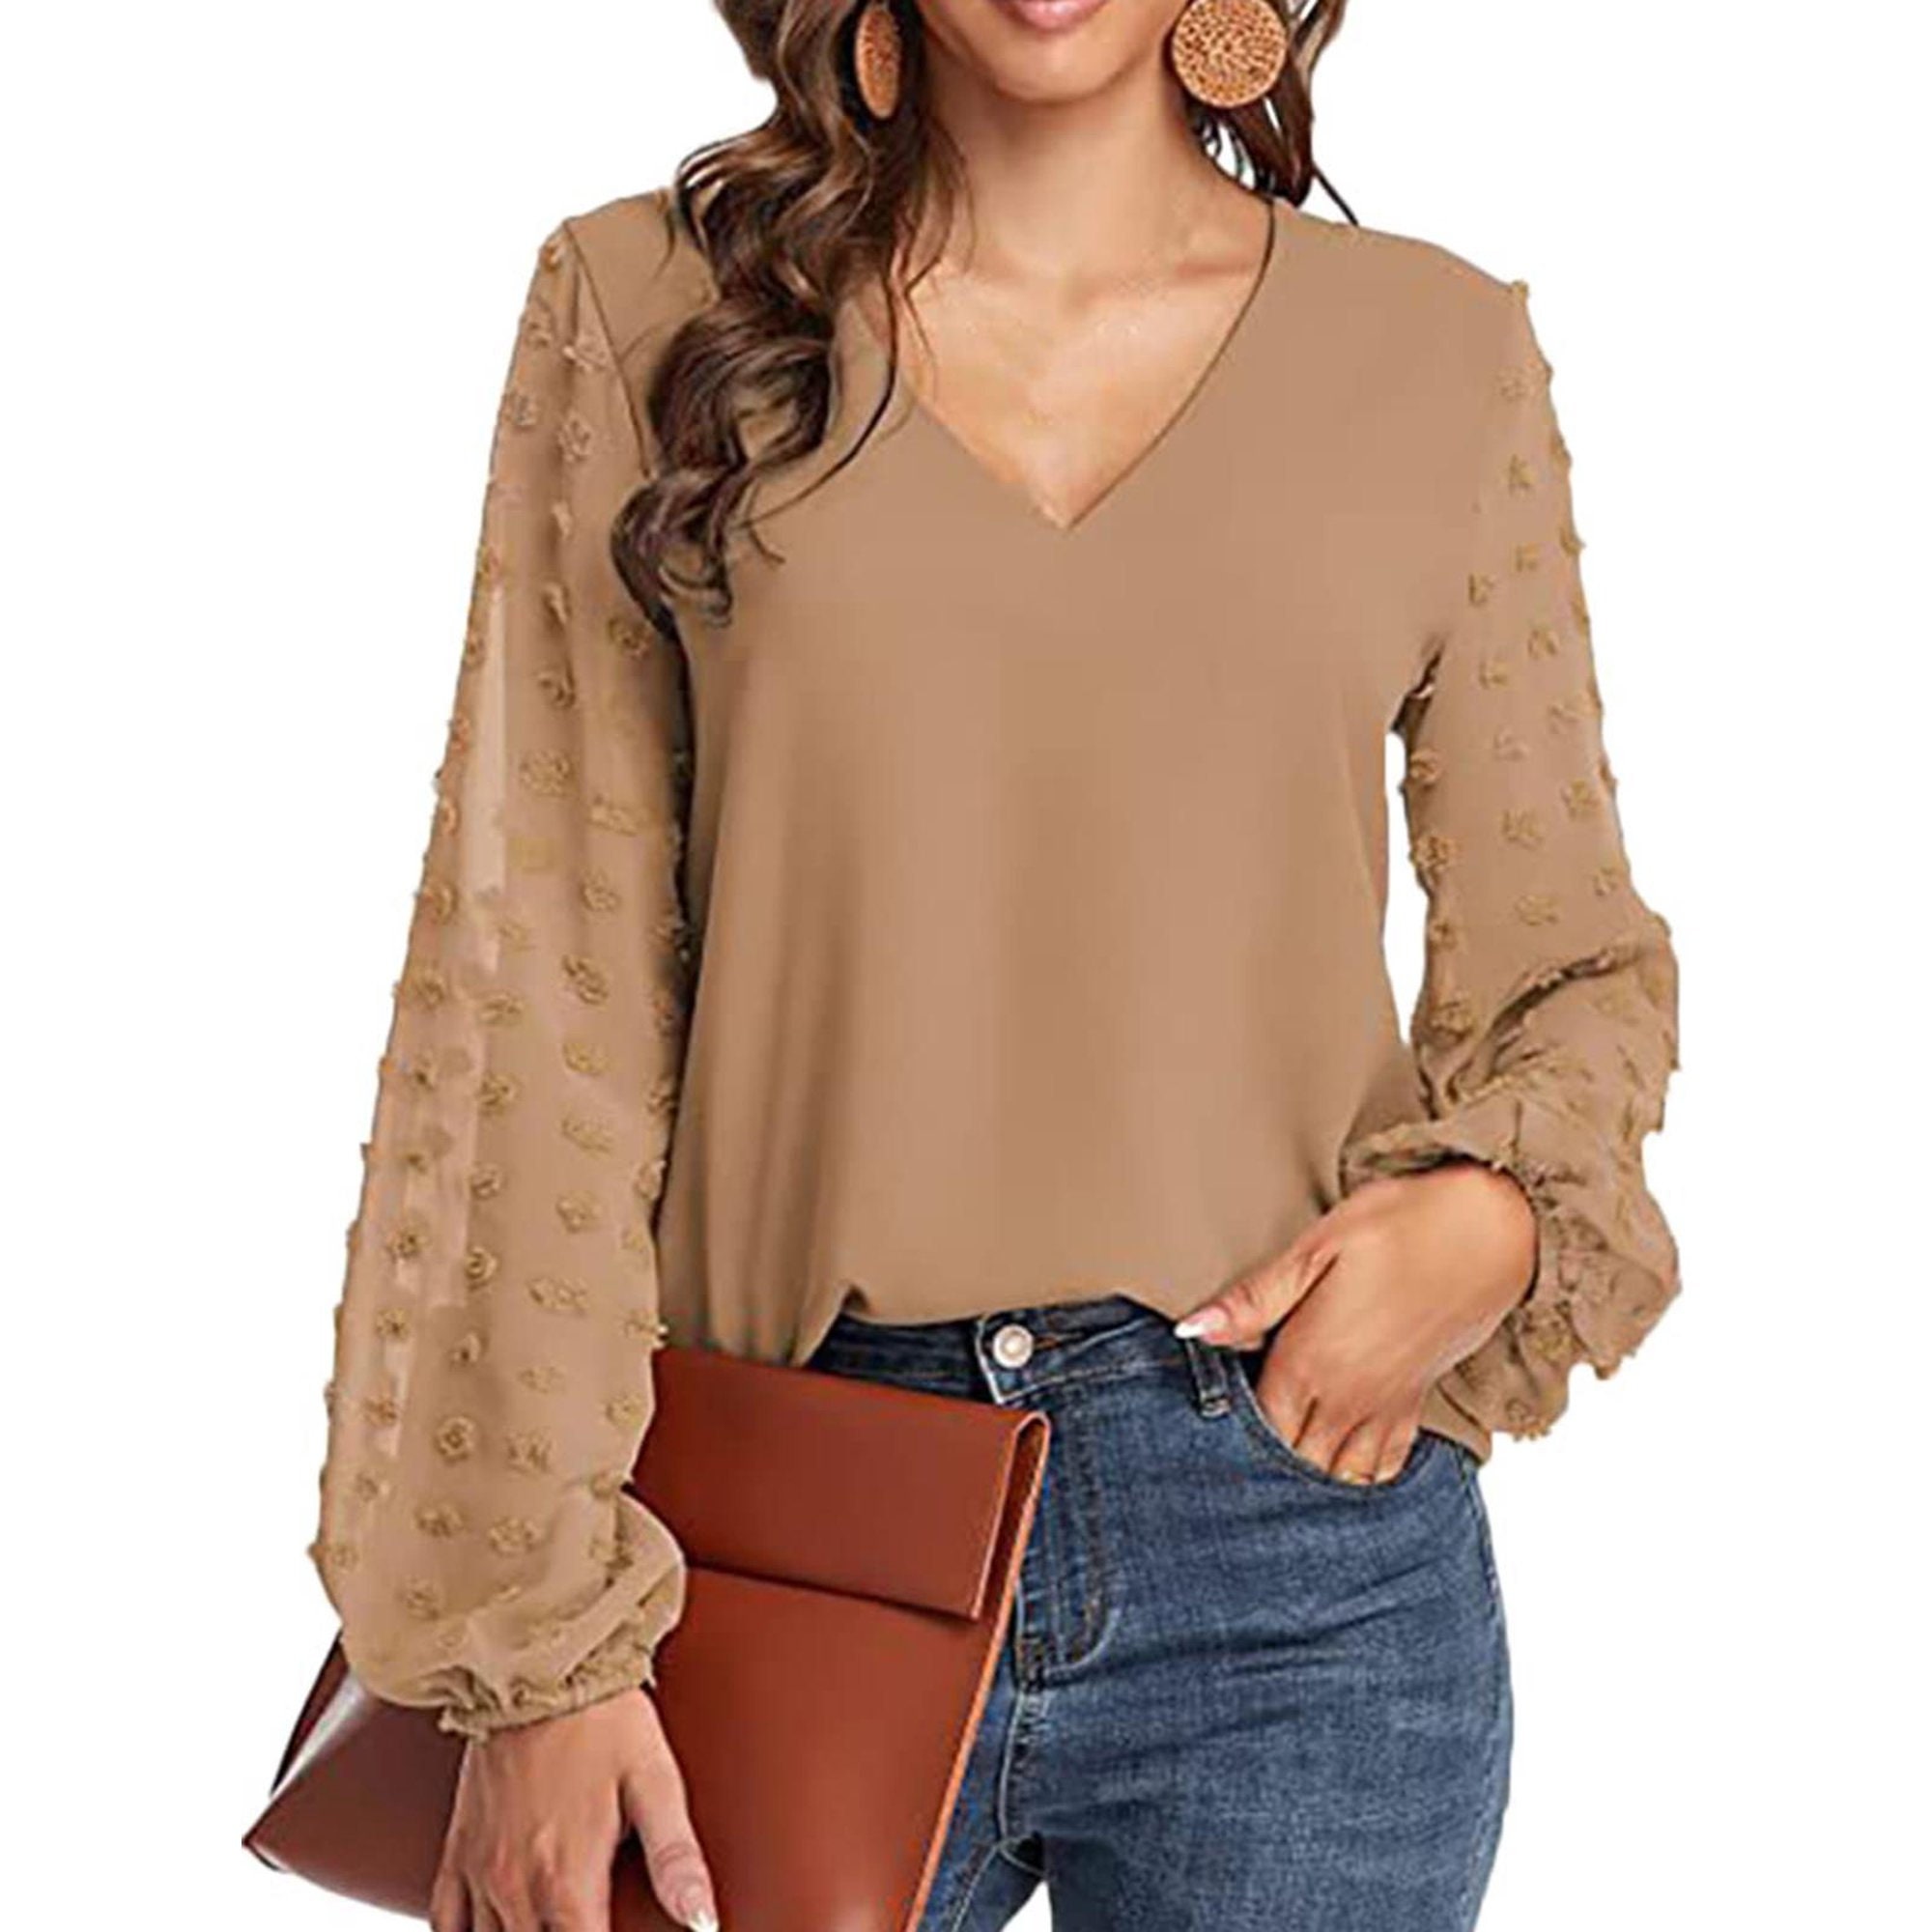 Plus Size Women's Tops, Shirts For Women Casual Summer Long Sleeve Crop Top  Junior Tops Under 10 Dollars Casual Solid Fold Shirt Round Neck Blouse